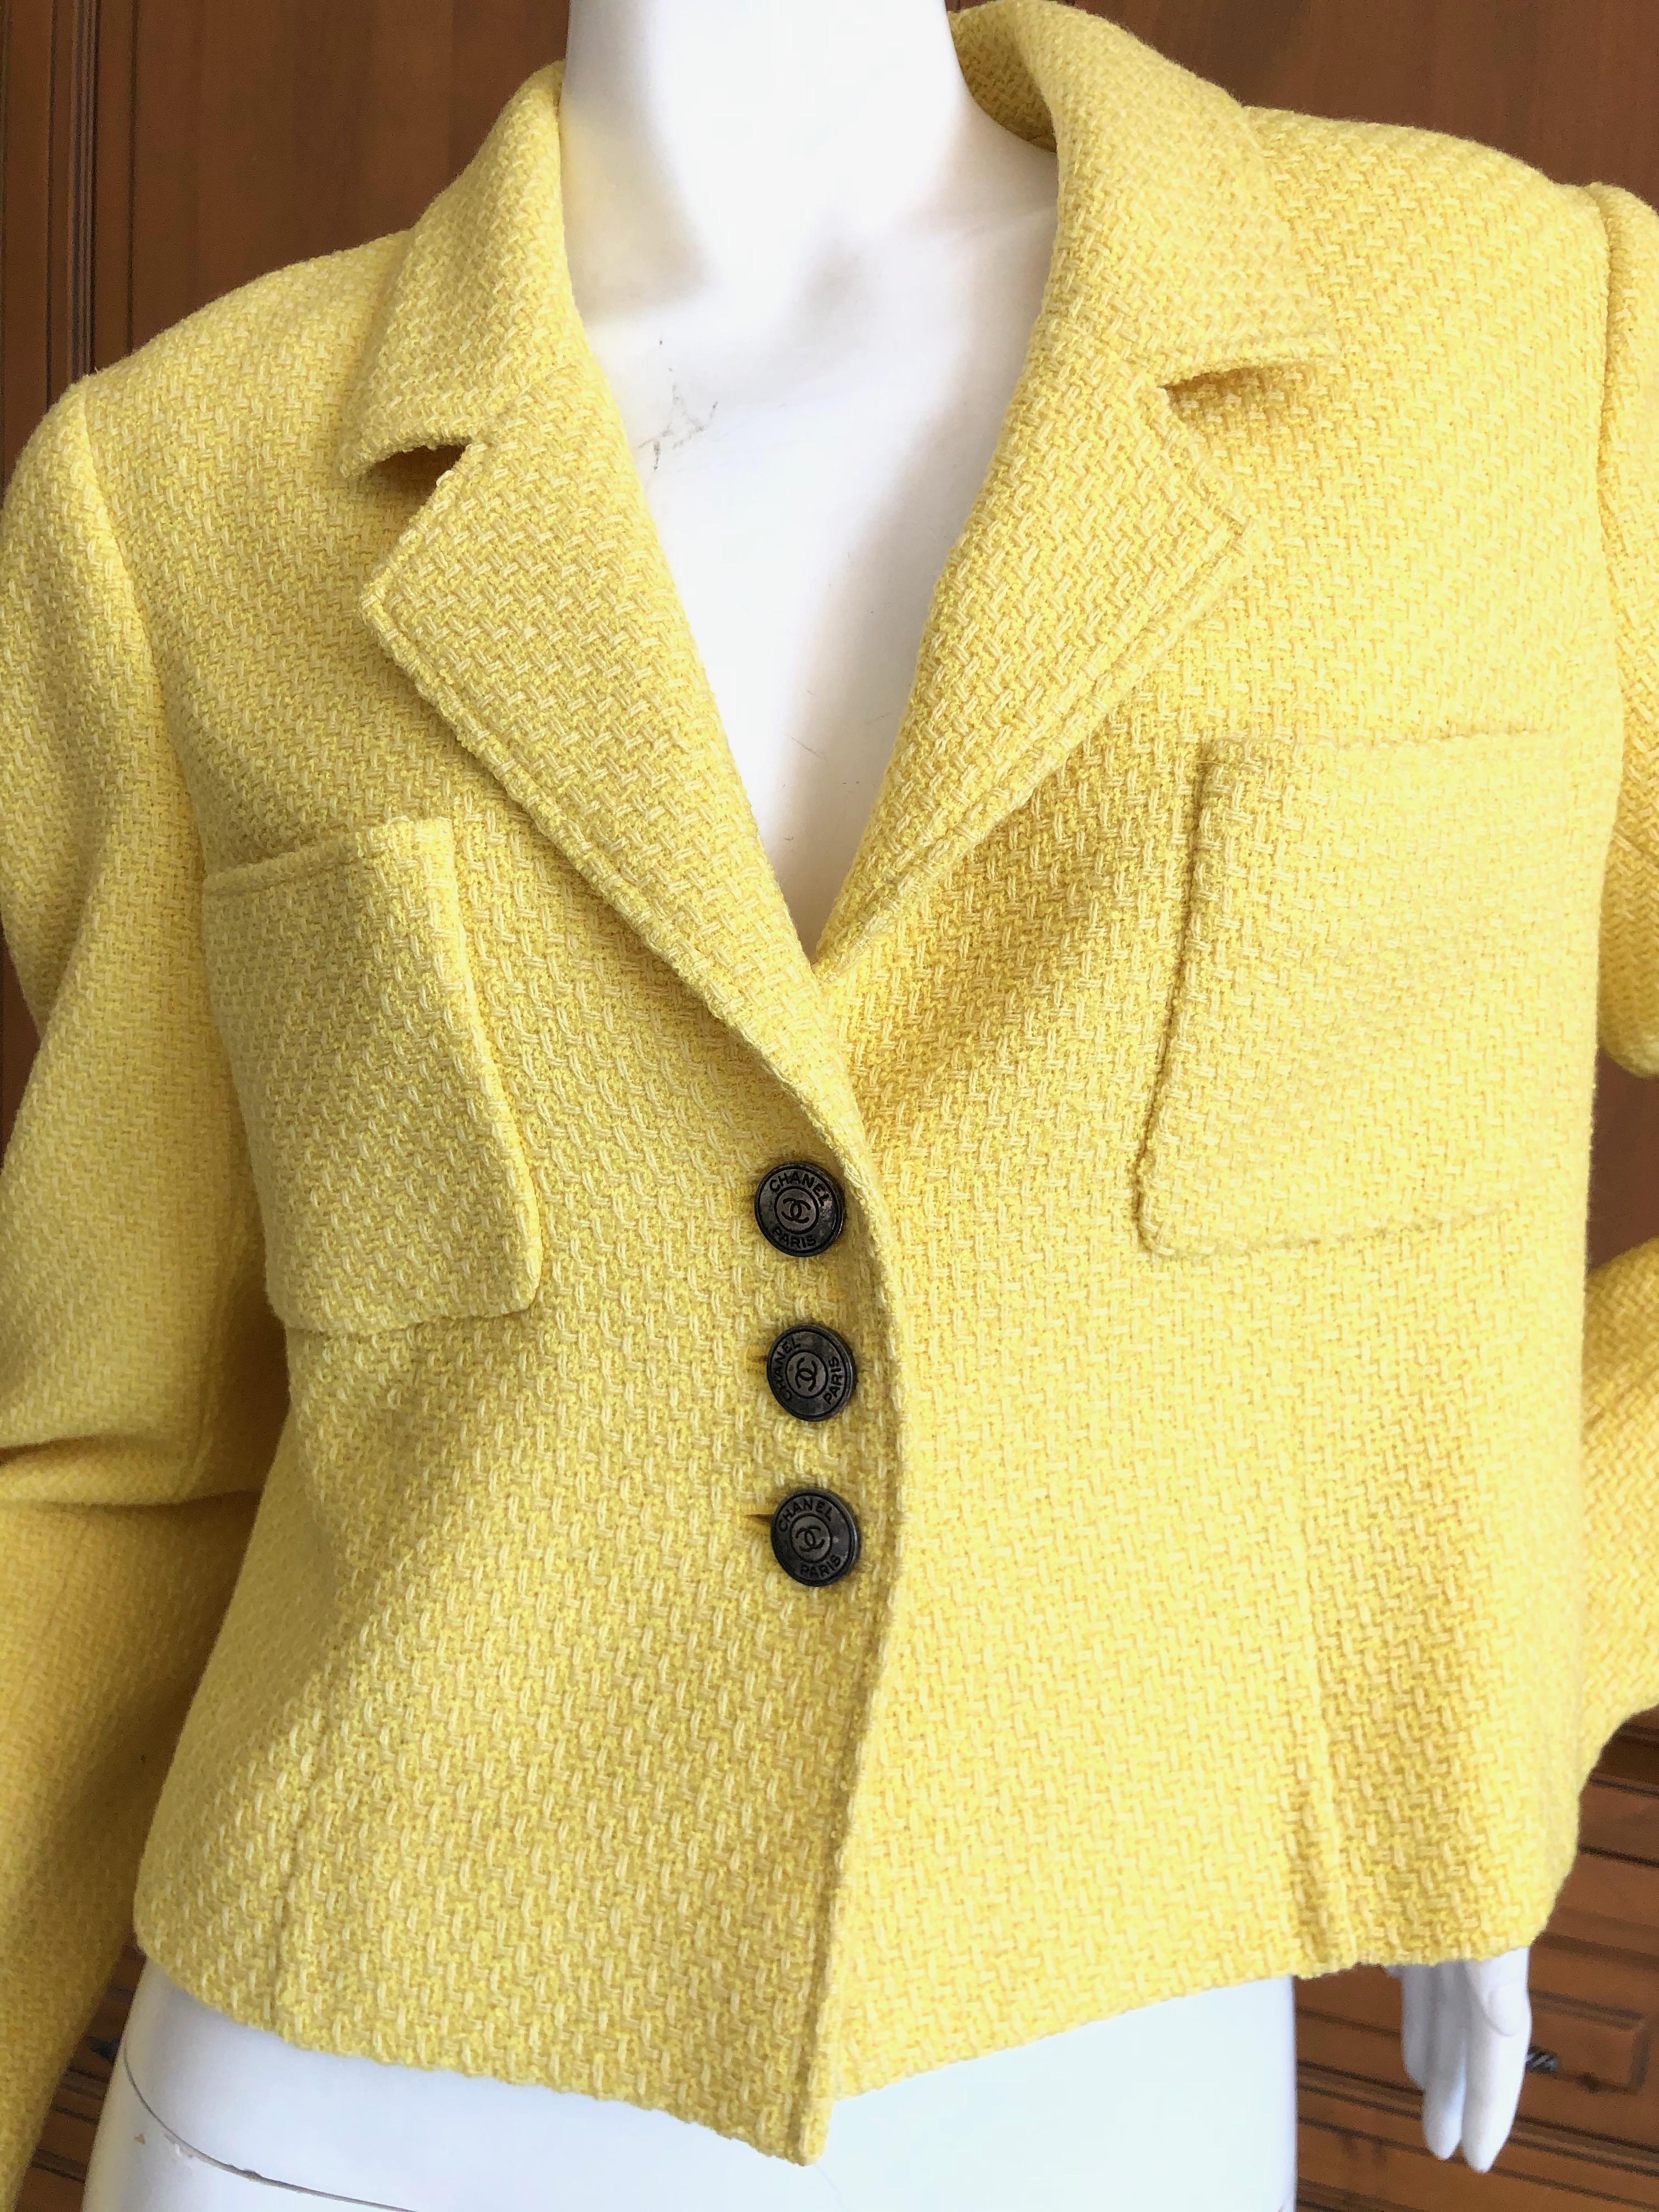 Chanel Darling Vintage Cropped Yellow Boucle Jacket
CC buttons
So pretty , please use zoom feature to see details
Size 42
Bust 40